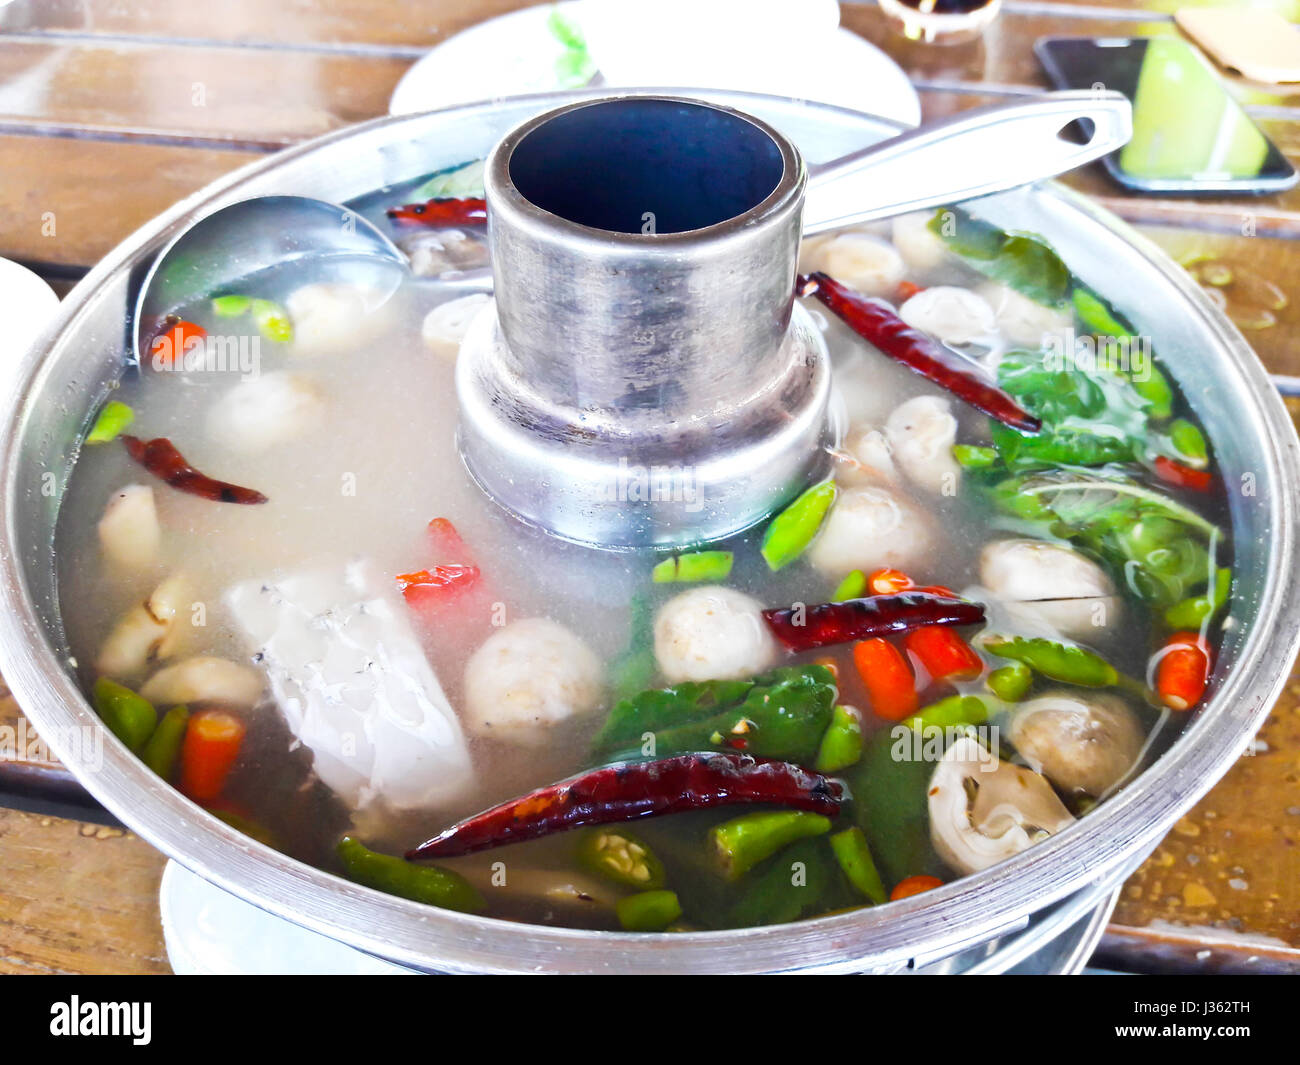 https://c8.alamy.com/comp/J362TH/serving-of-spicy-fish-soup-thai-style-in-a-hot-pot-J362TH.jpg